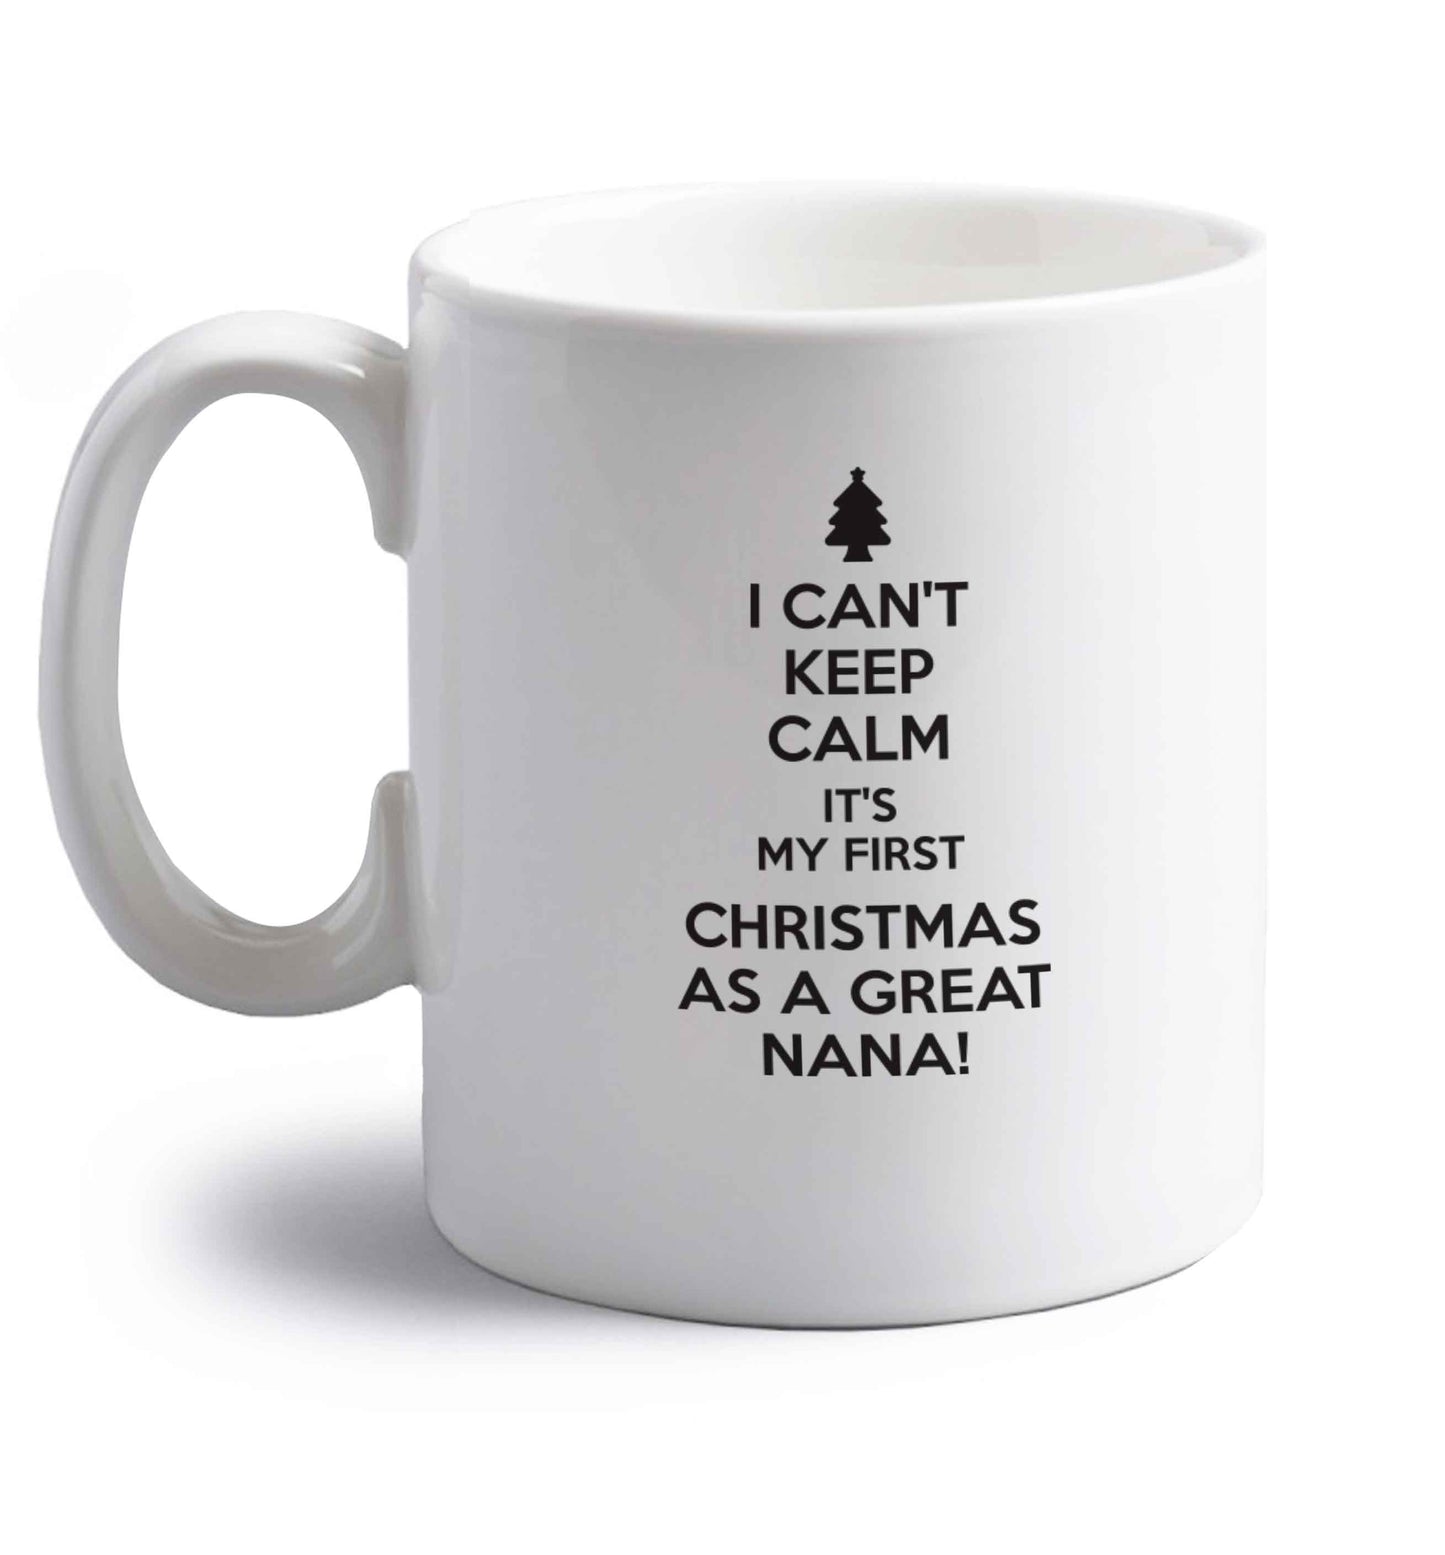 I can't keep calm it's my first Christmas as a great nana! right handed white ceramic mug 